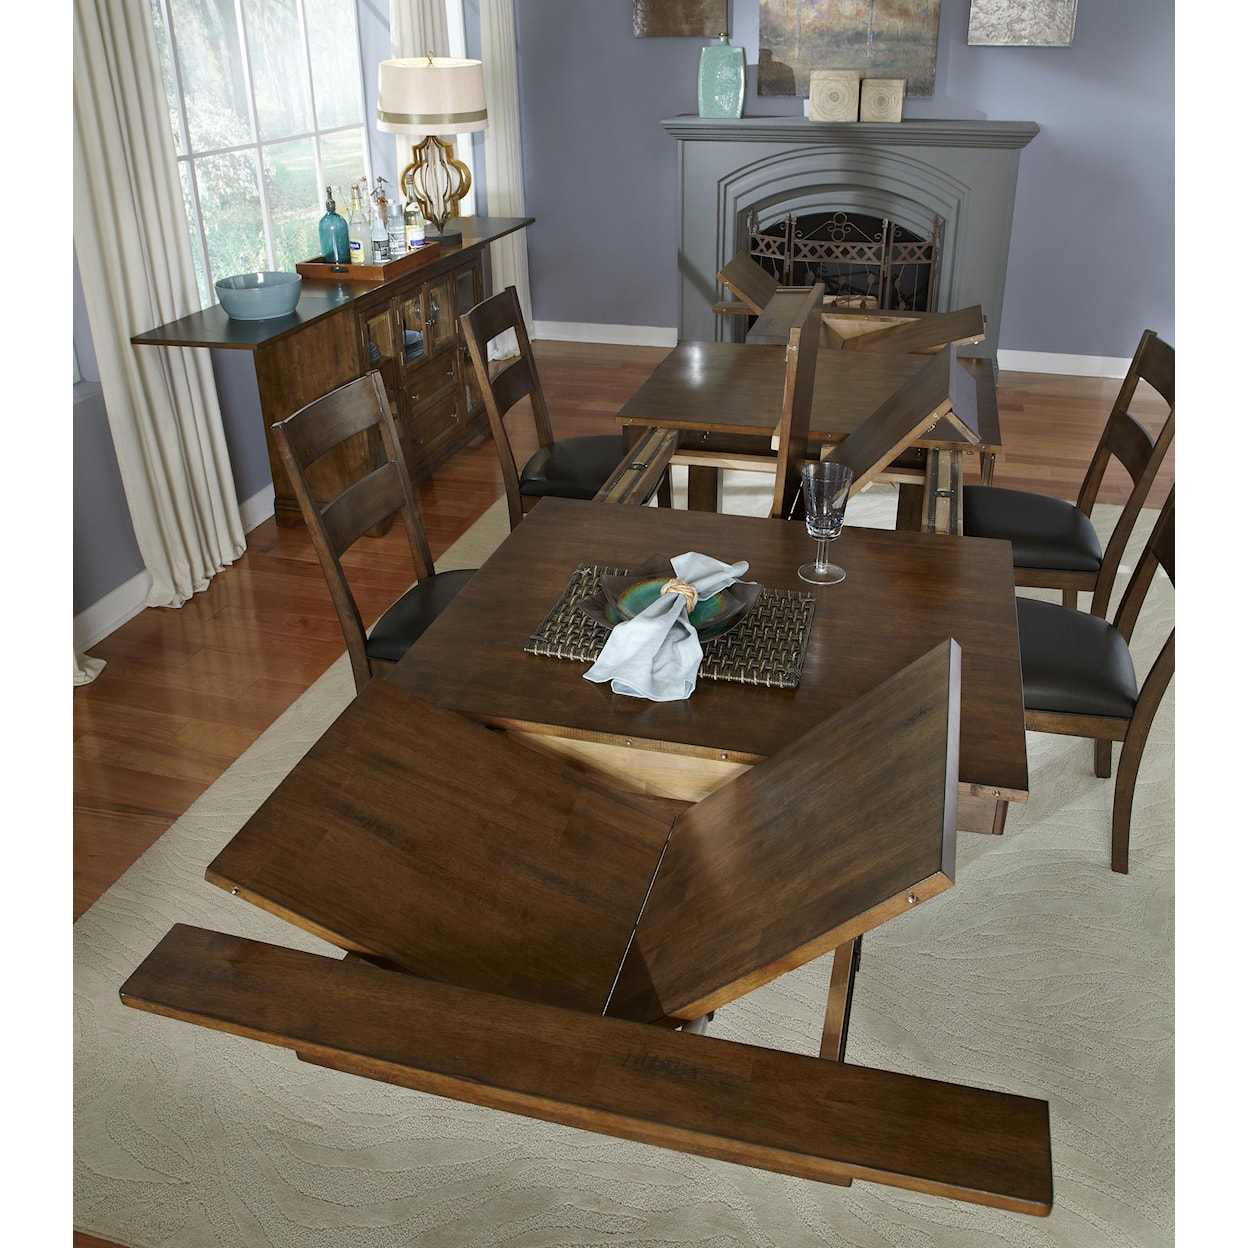 AAmerica Mariposa 11 Piece Table and Chairs Set